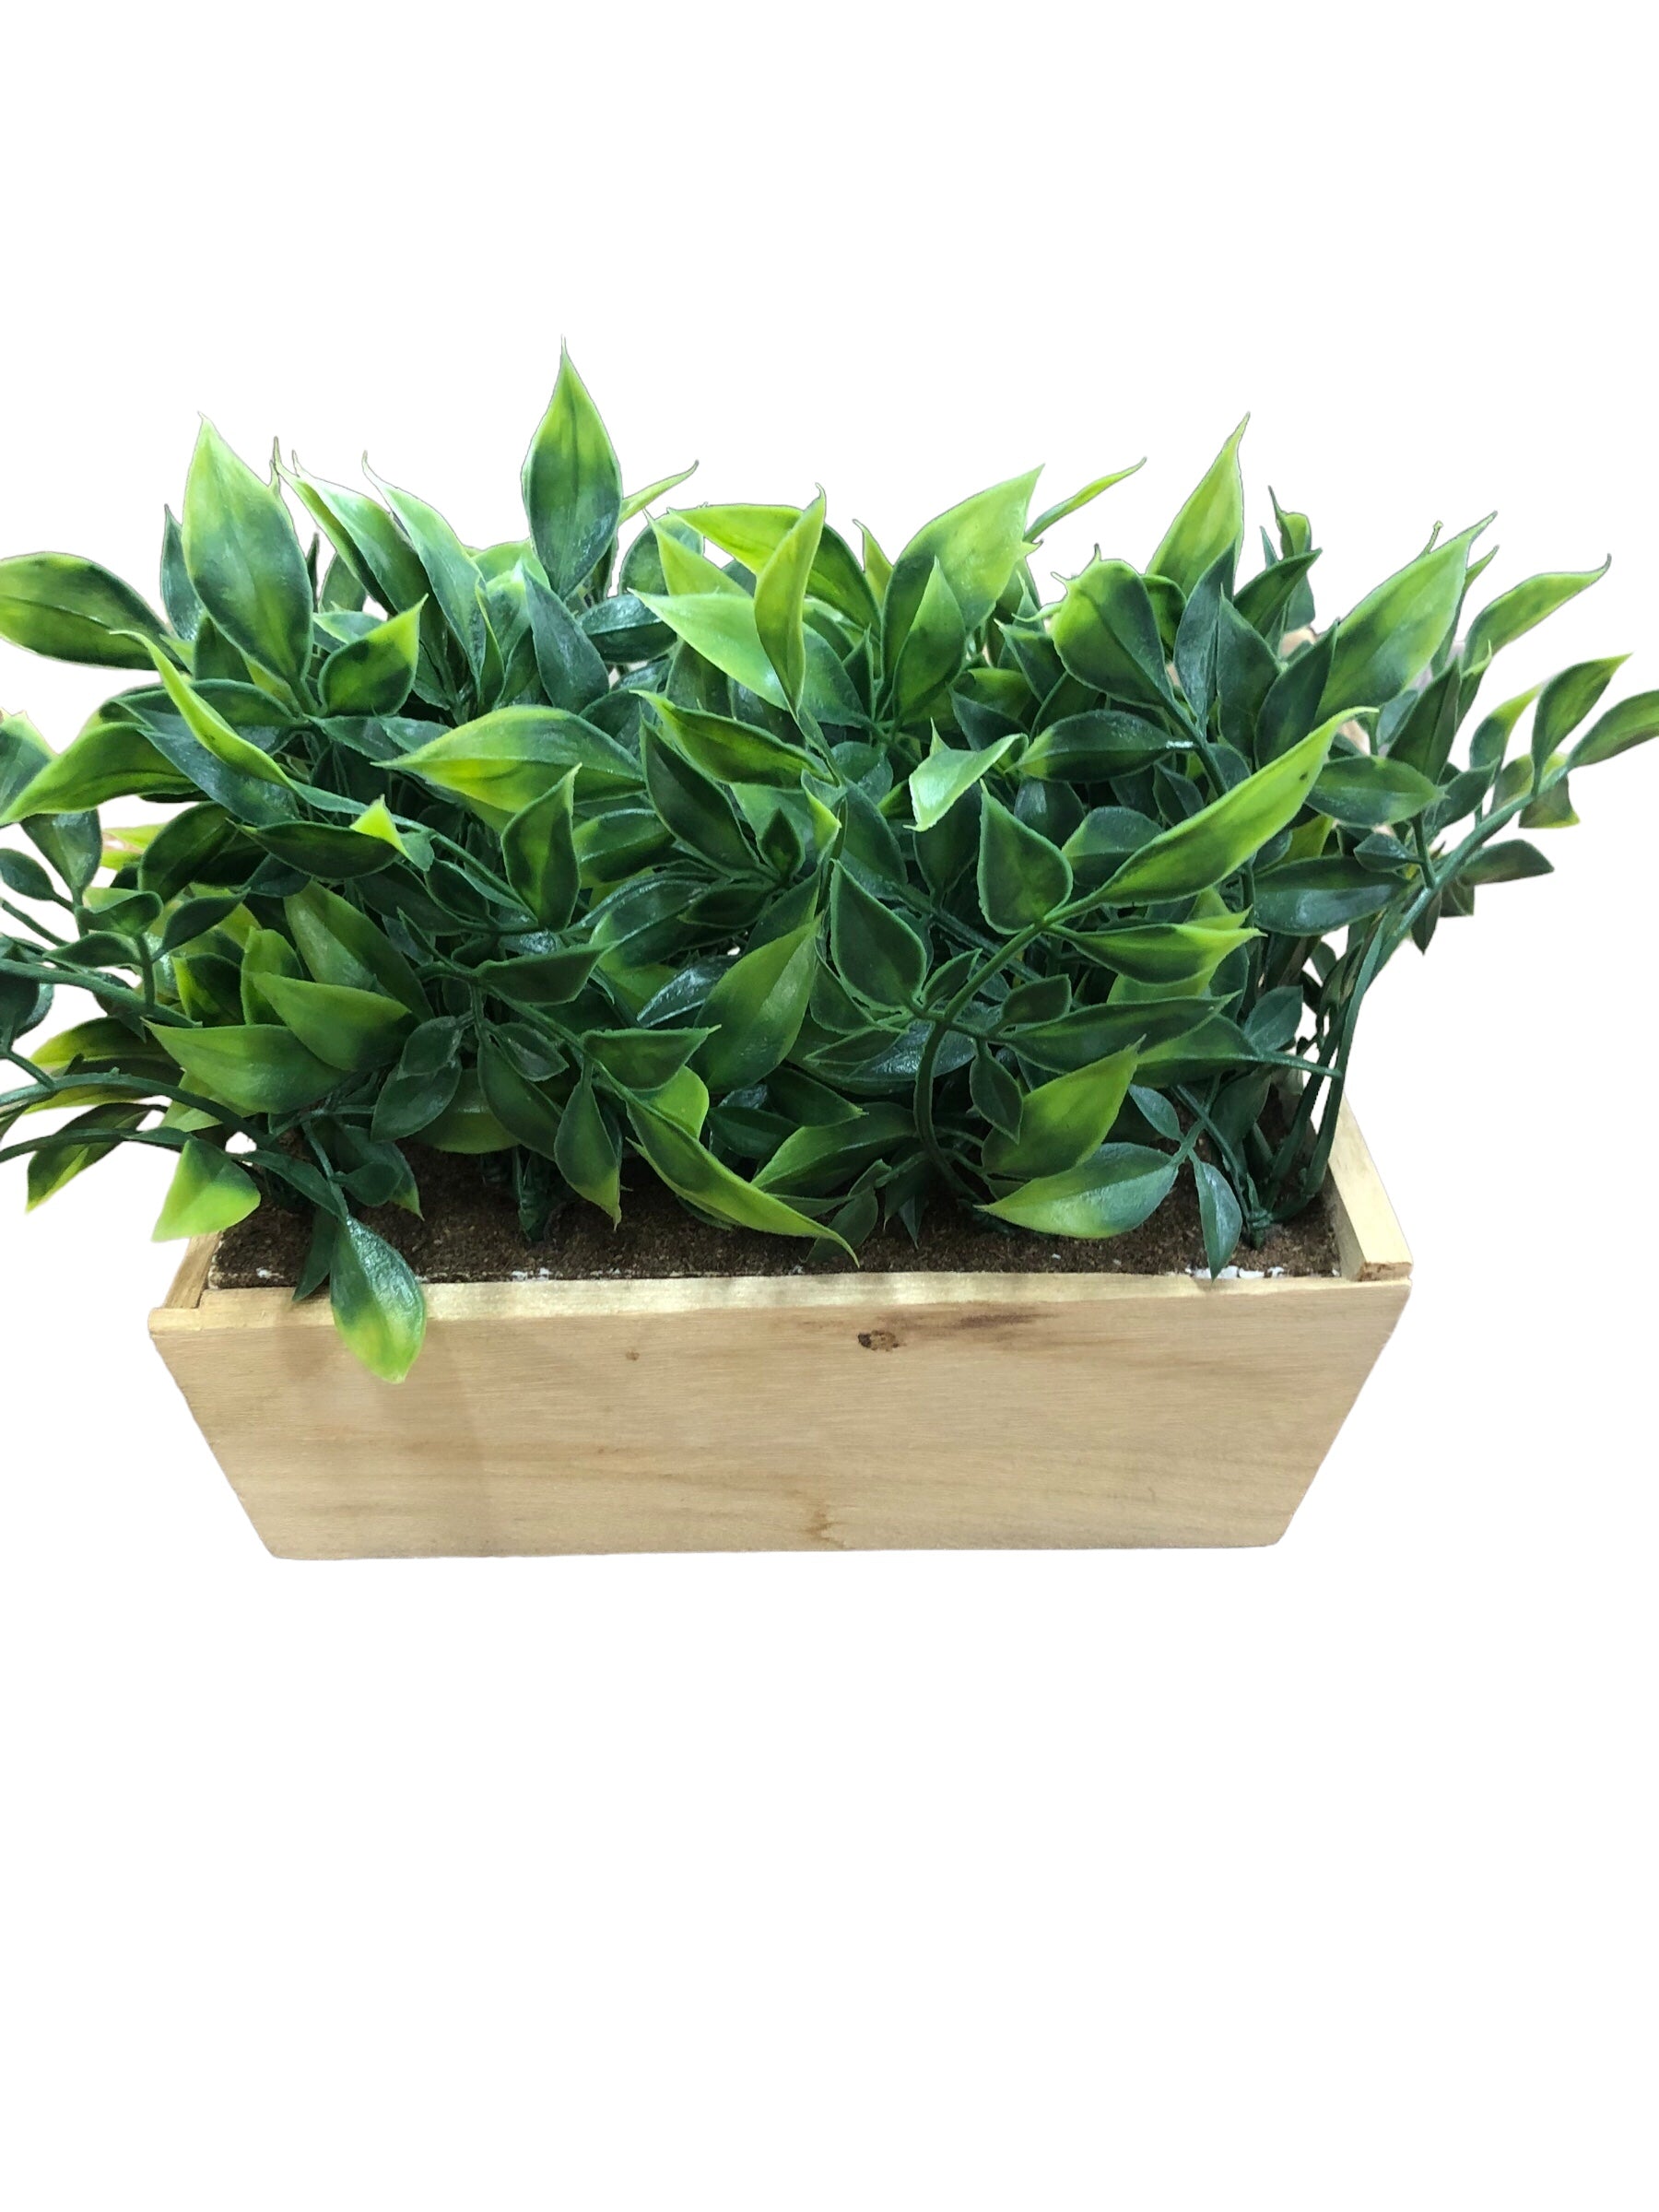 Faux plant in long wooden box